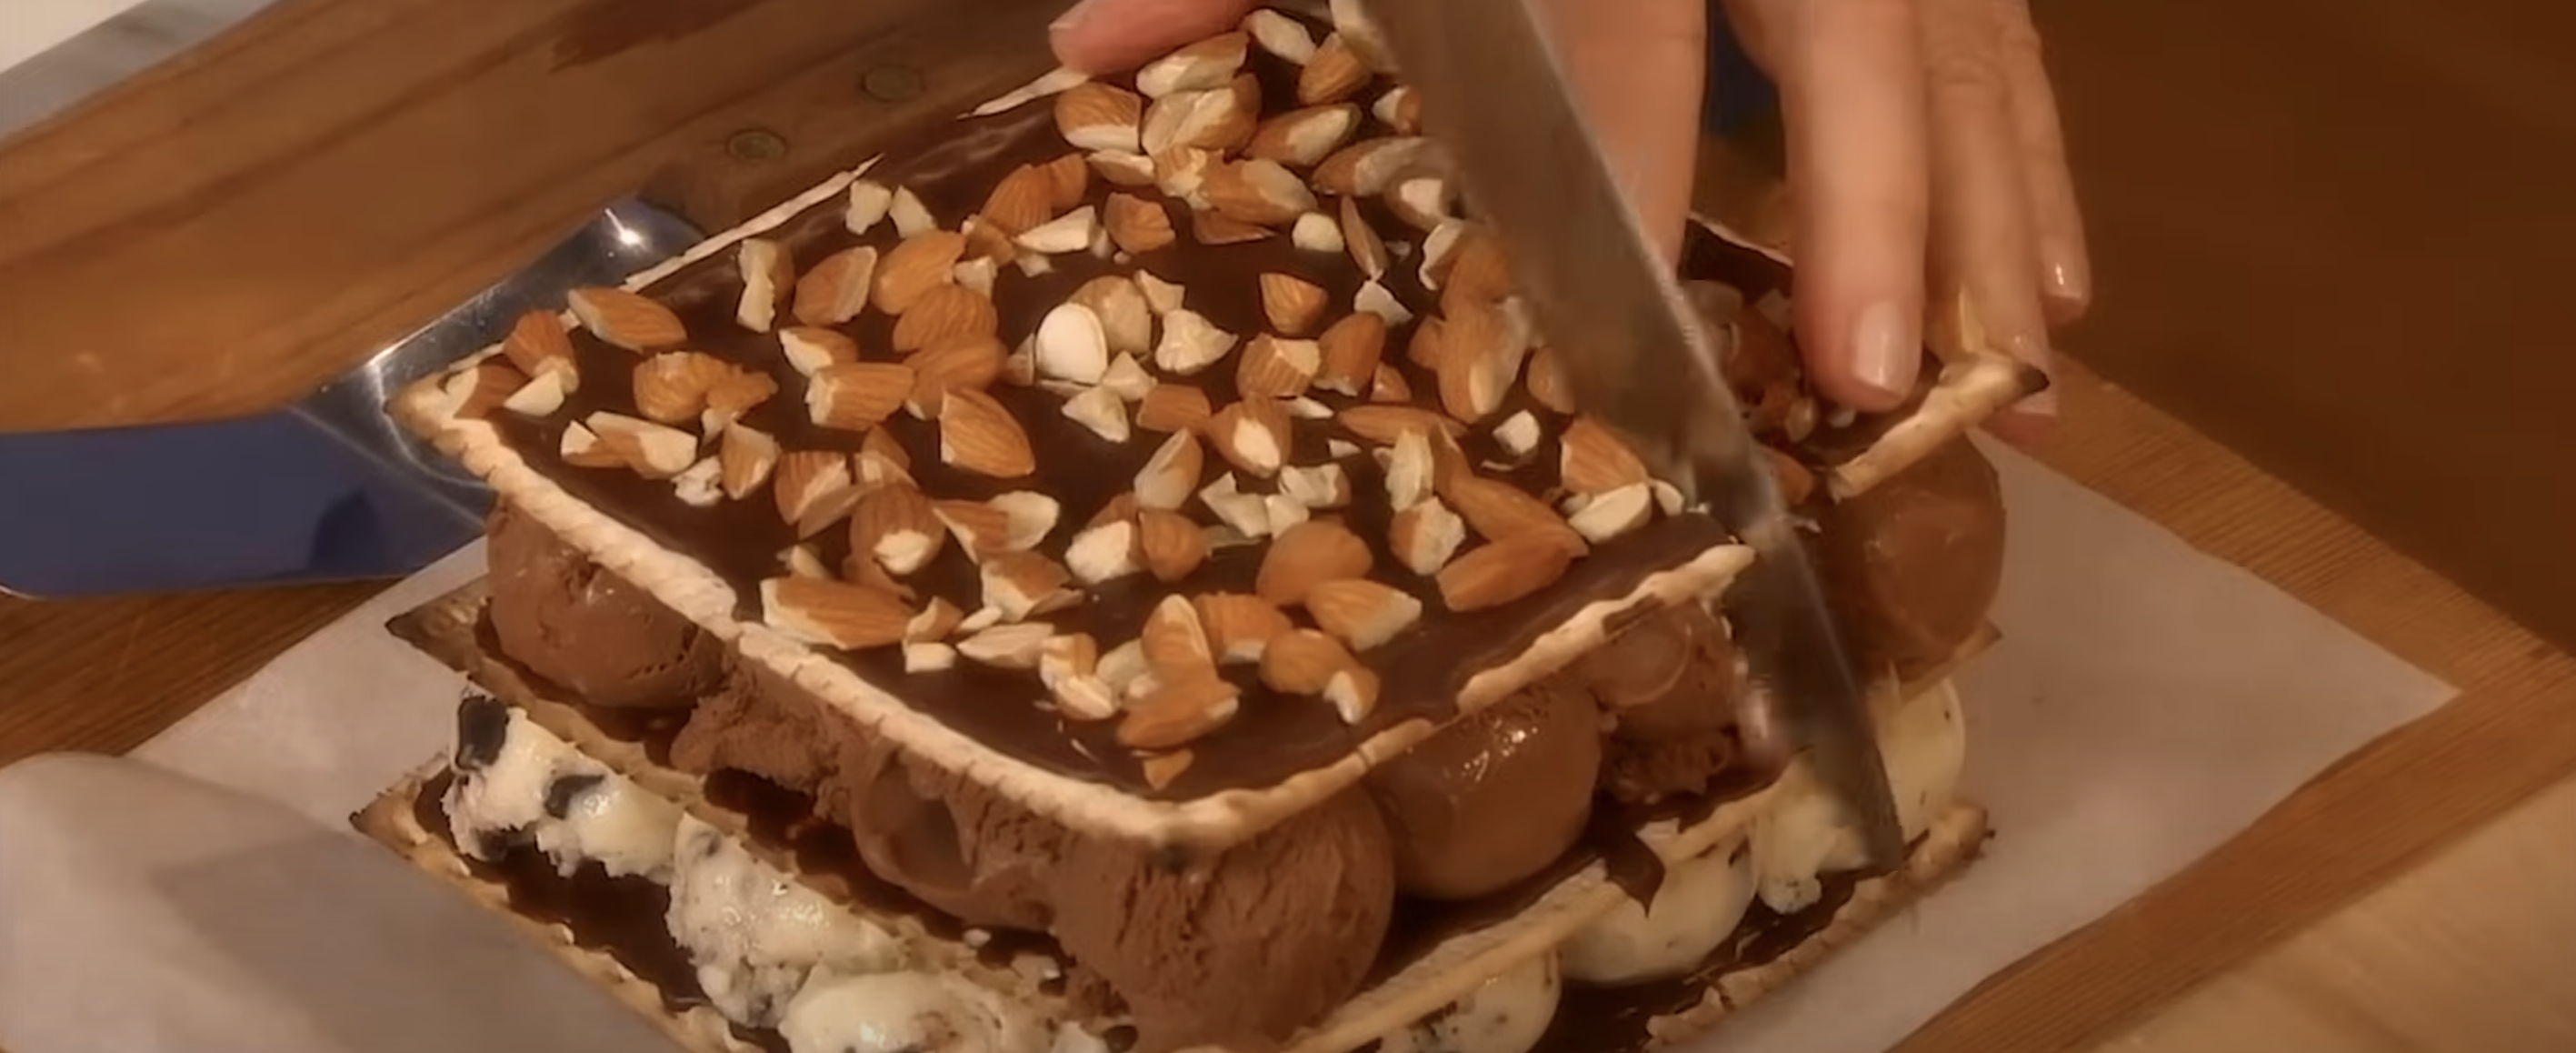 A hand slices a large ice cream sandwich with nuts on top, placed on a wooden board